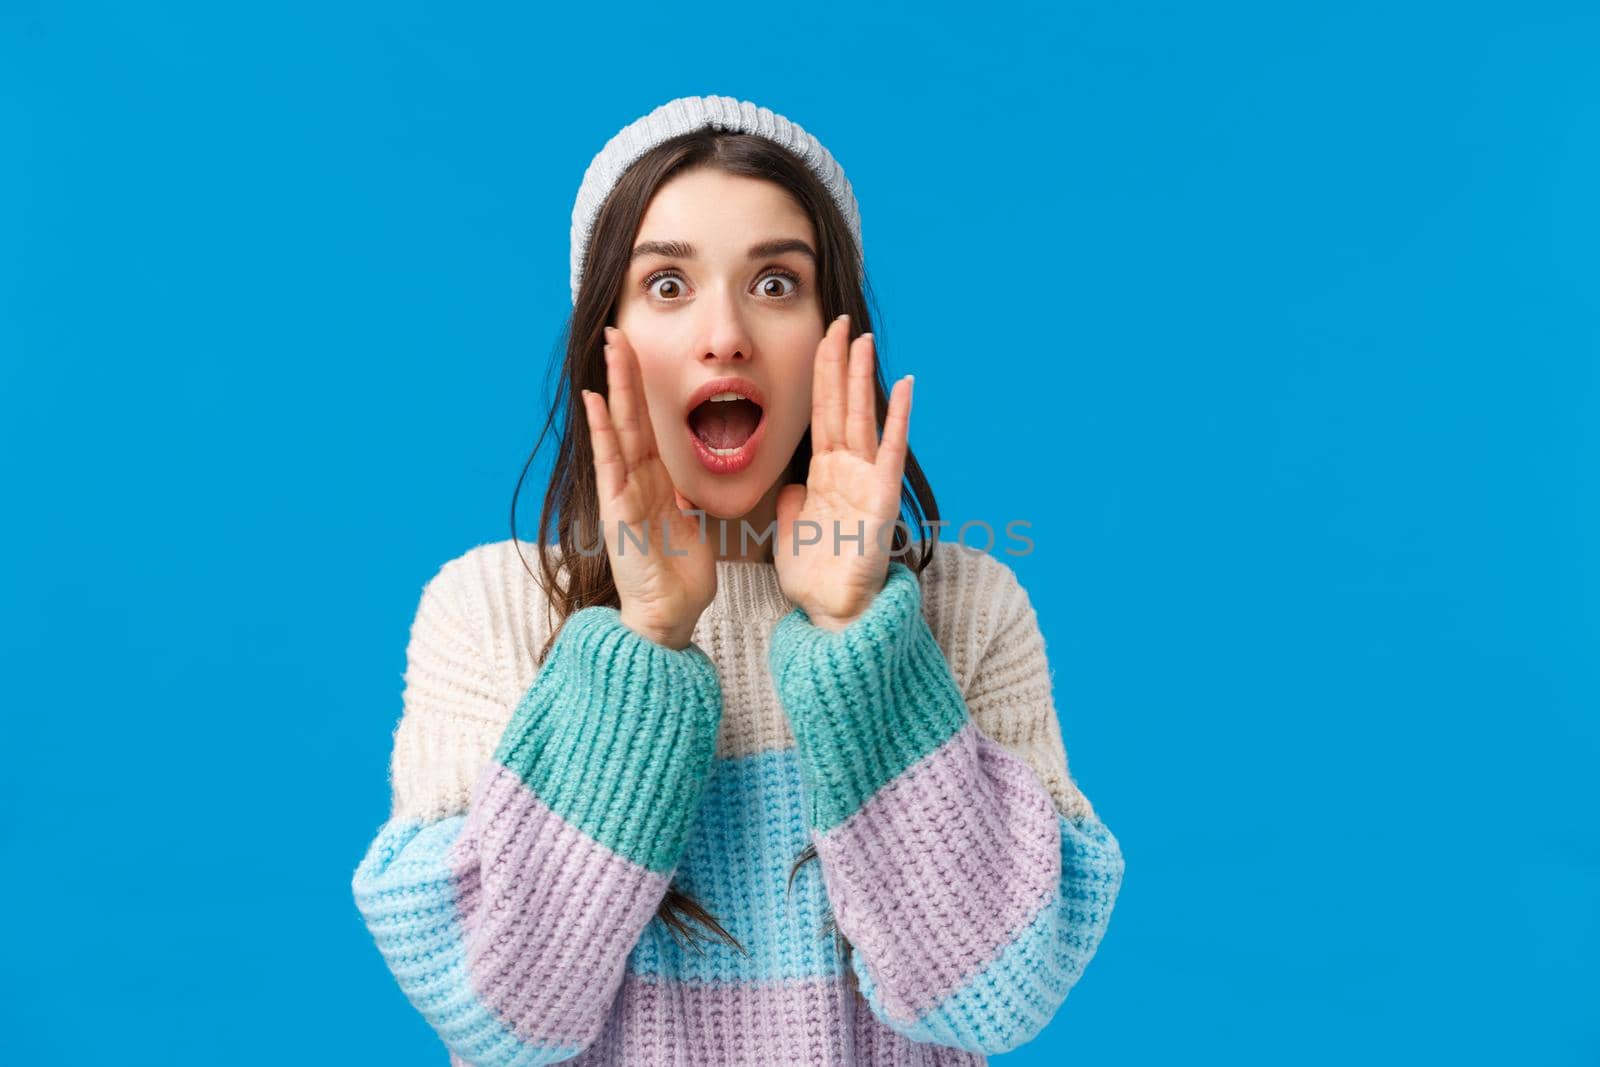 Waist-up portrait silly, cute feminine young woman in winter hat, sweater, calling for someone, shouting with hands near opened mouth, looking camera searching, standing blue background.